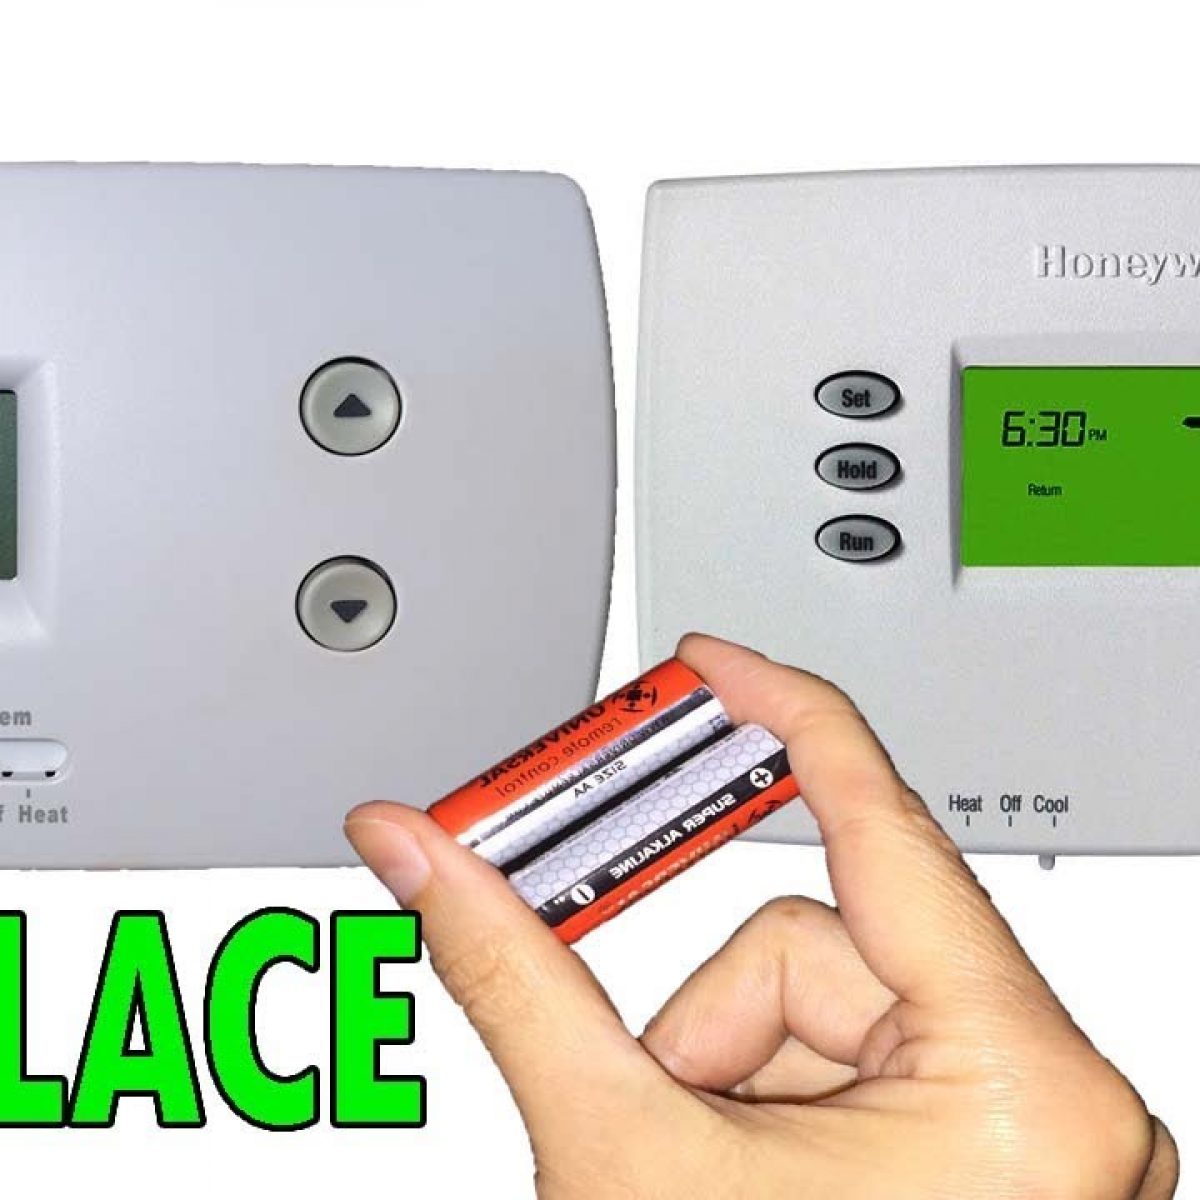 How to Change the Battery in a Honeywell Thermostat